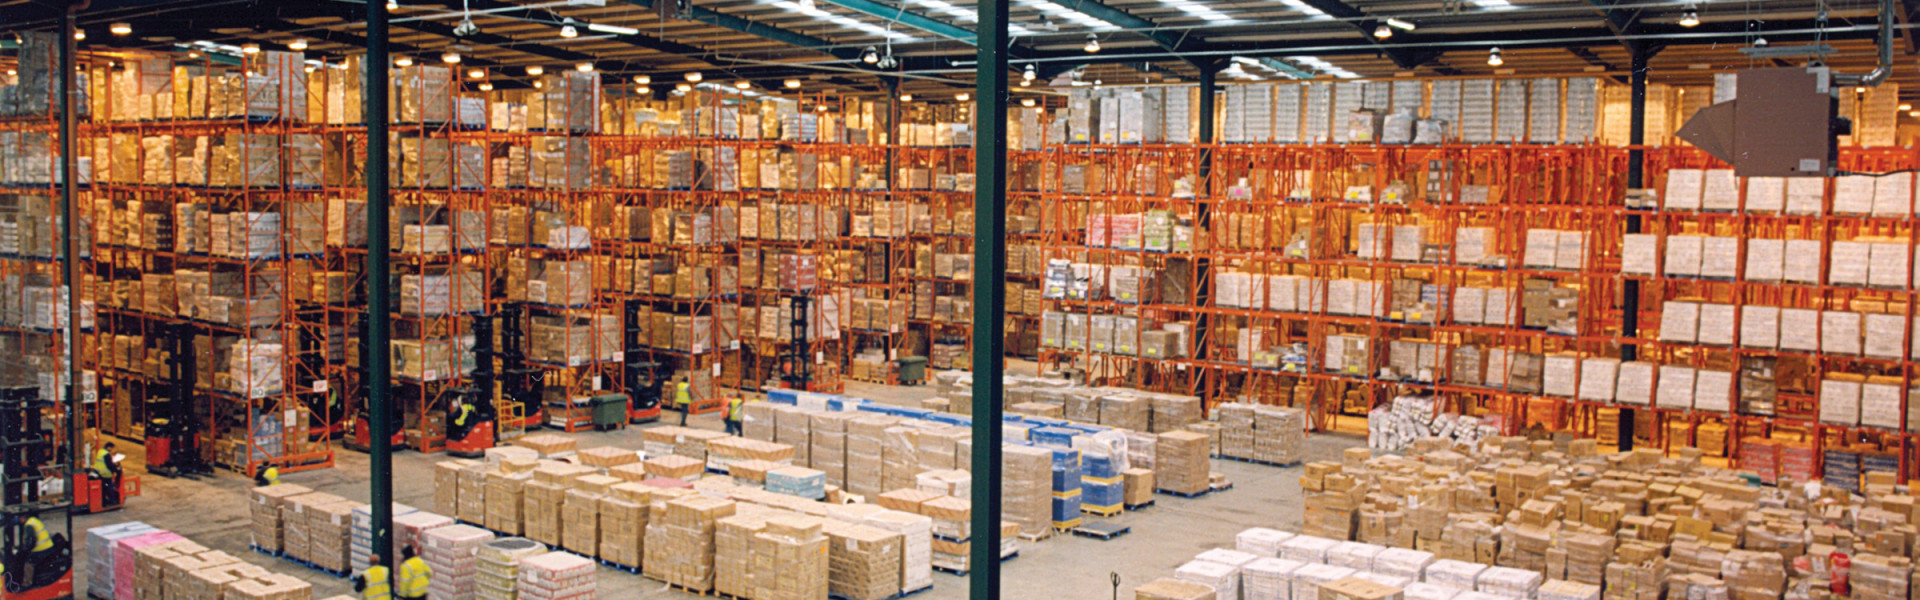 Highly advanced Warehouse Management System